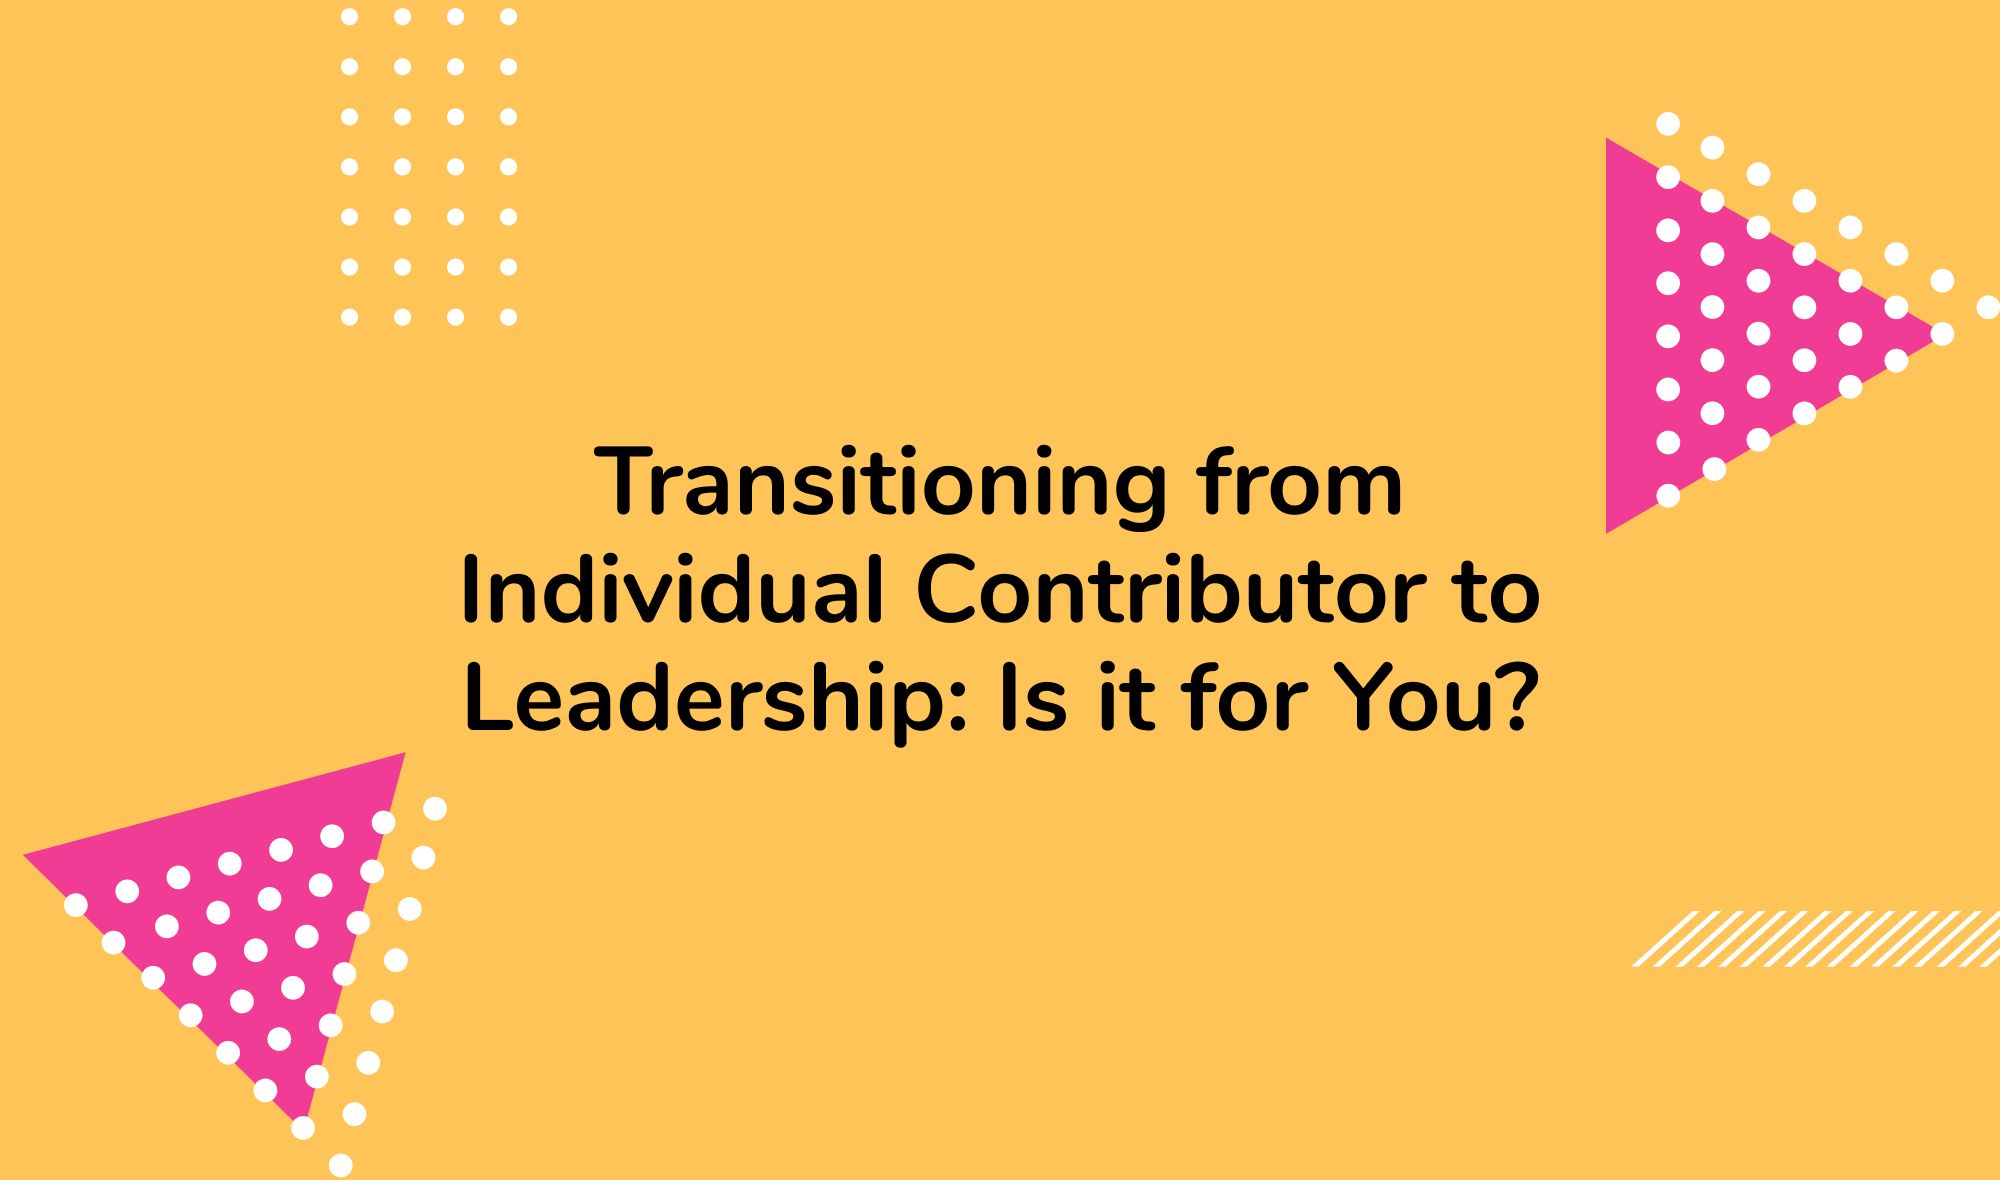 Transitioning from Individual Contributor to Leadership: Is it for You?